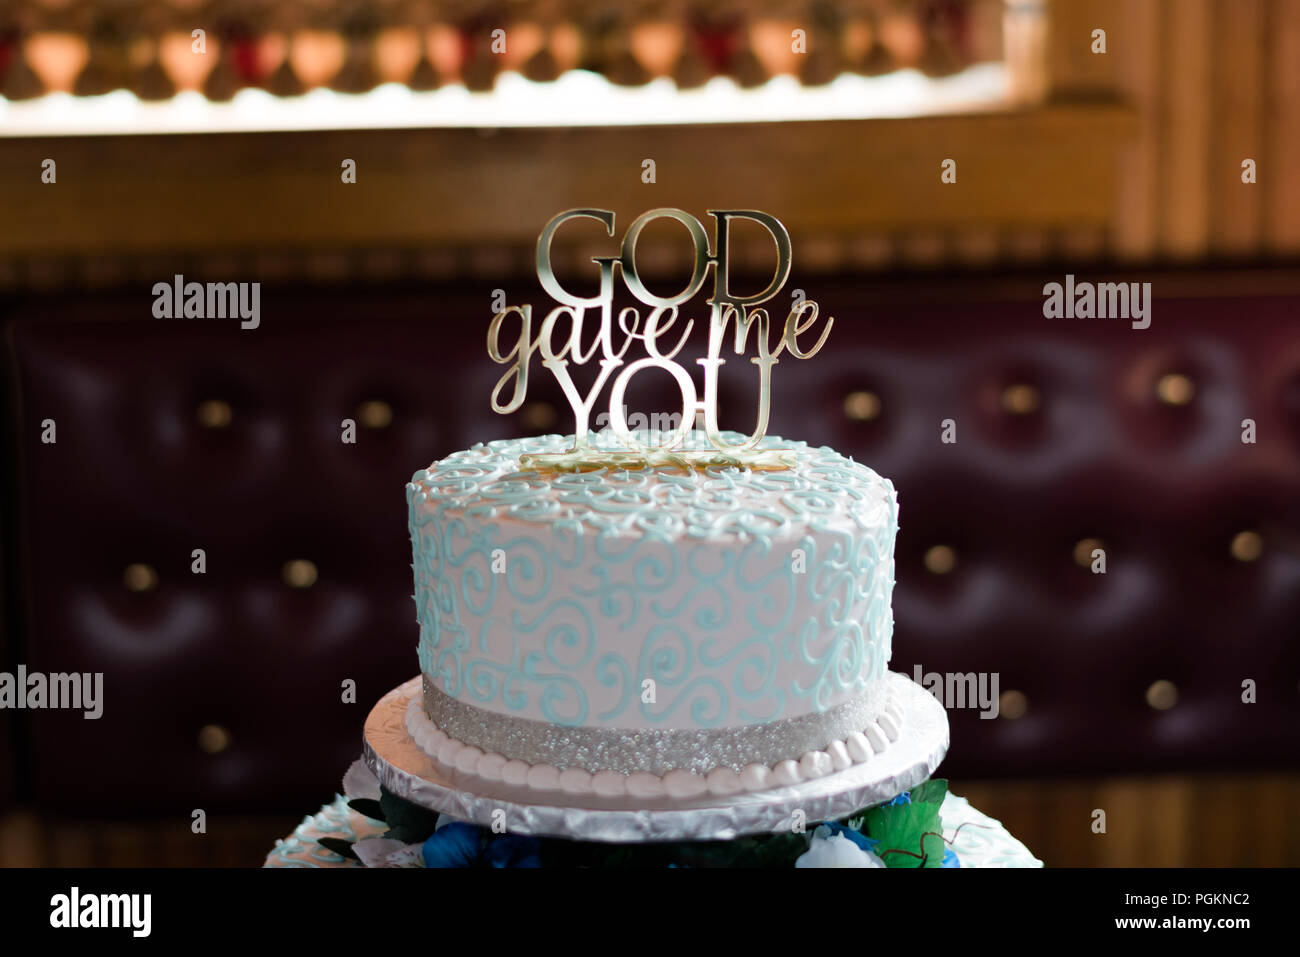 God gave me you, cake topper Stock Photo